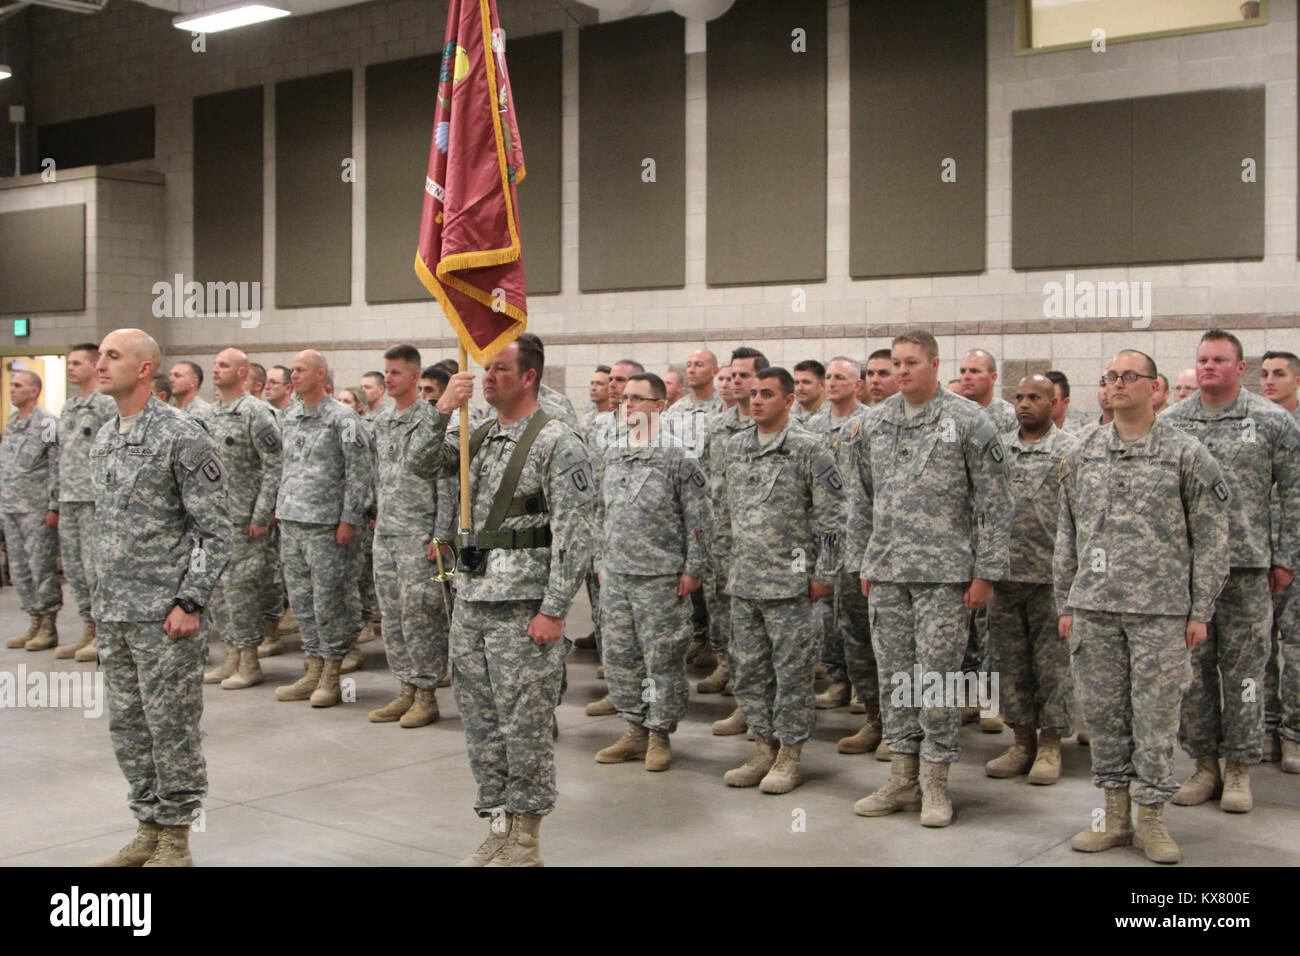 The 640th Regiment conducted change of responsibility where Command Sgt. Maj. Eric Anderson passed responsibility to Command Sgt. Major Spencer Nielsen, who was just promoted during the ceremony, at the TASS facility on Camp Wiliams May 14, 2015. Stock Photo